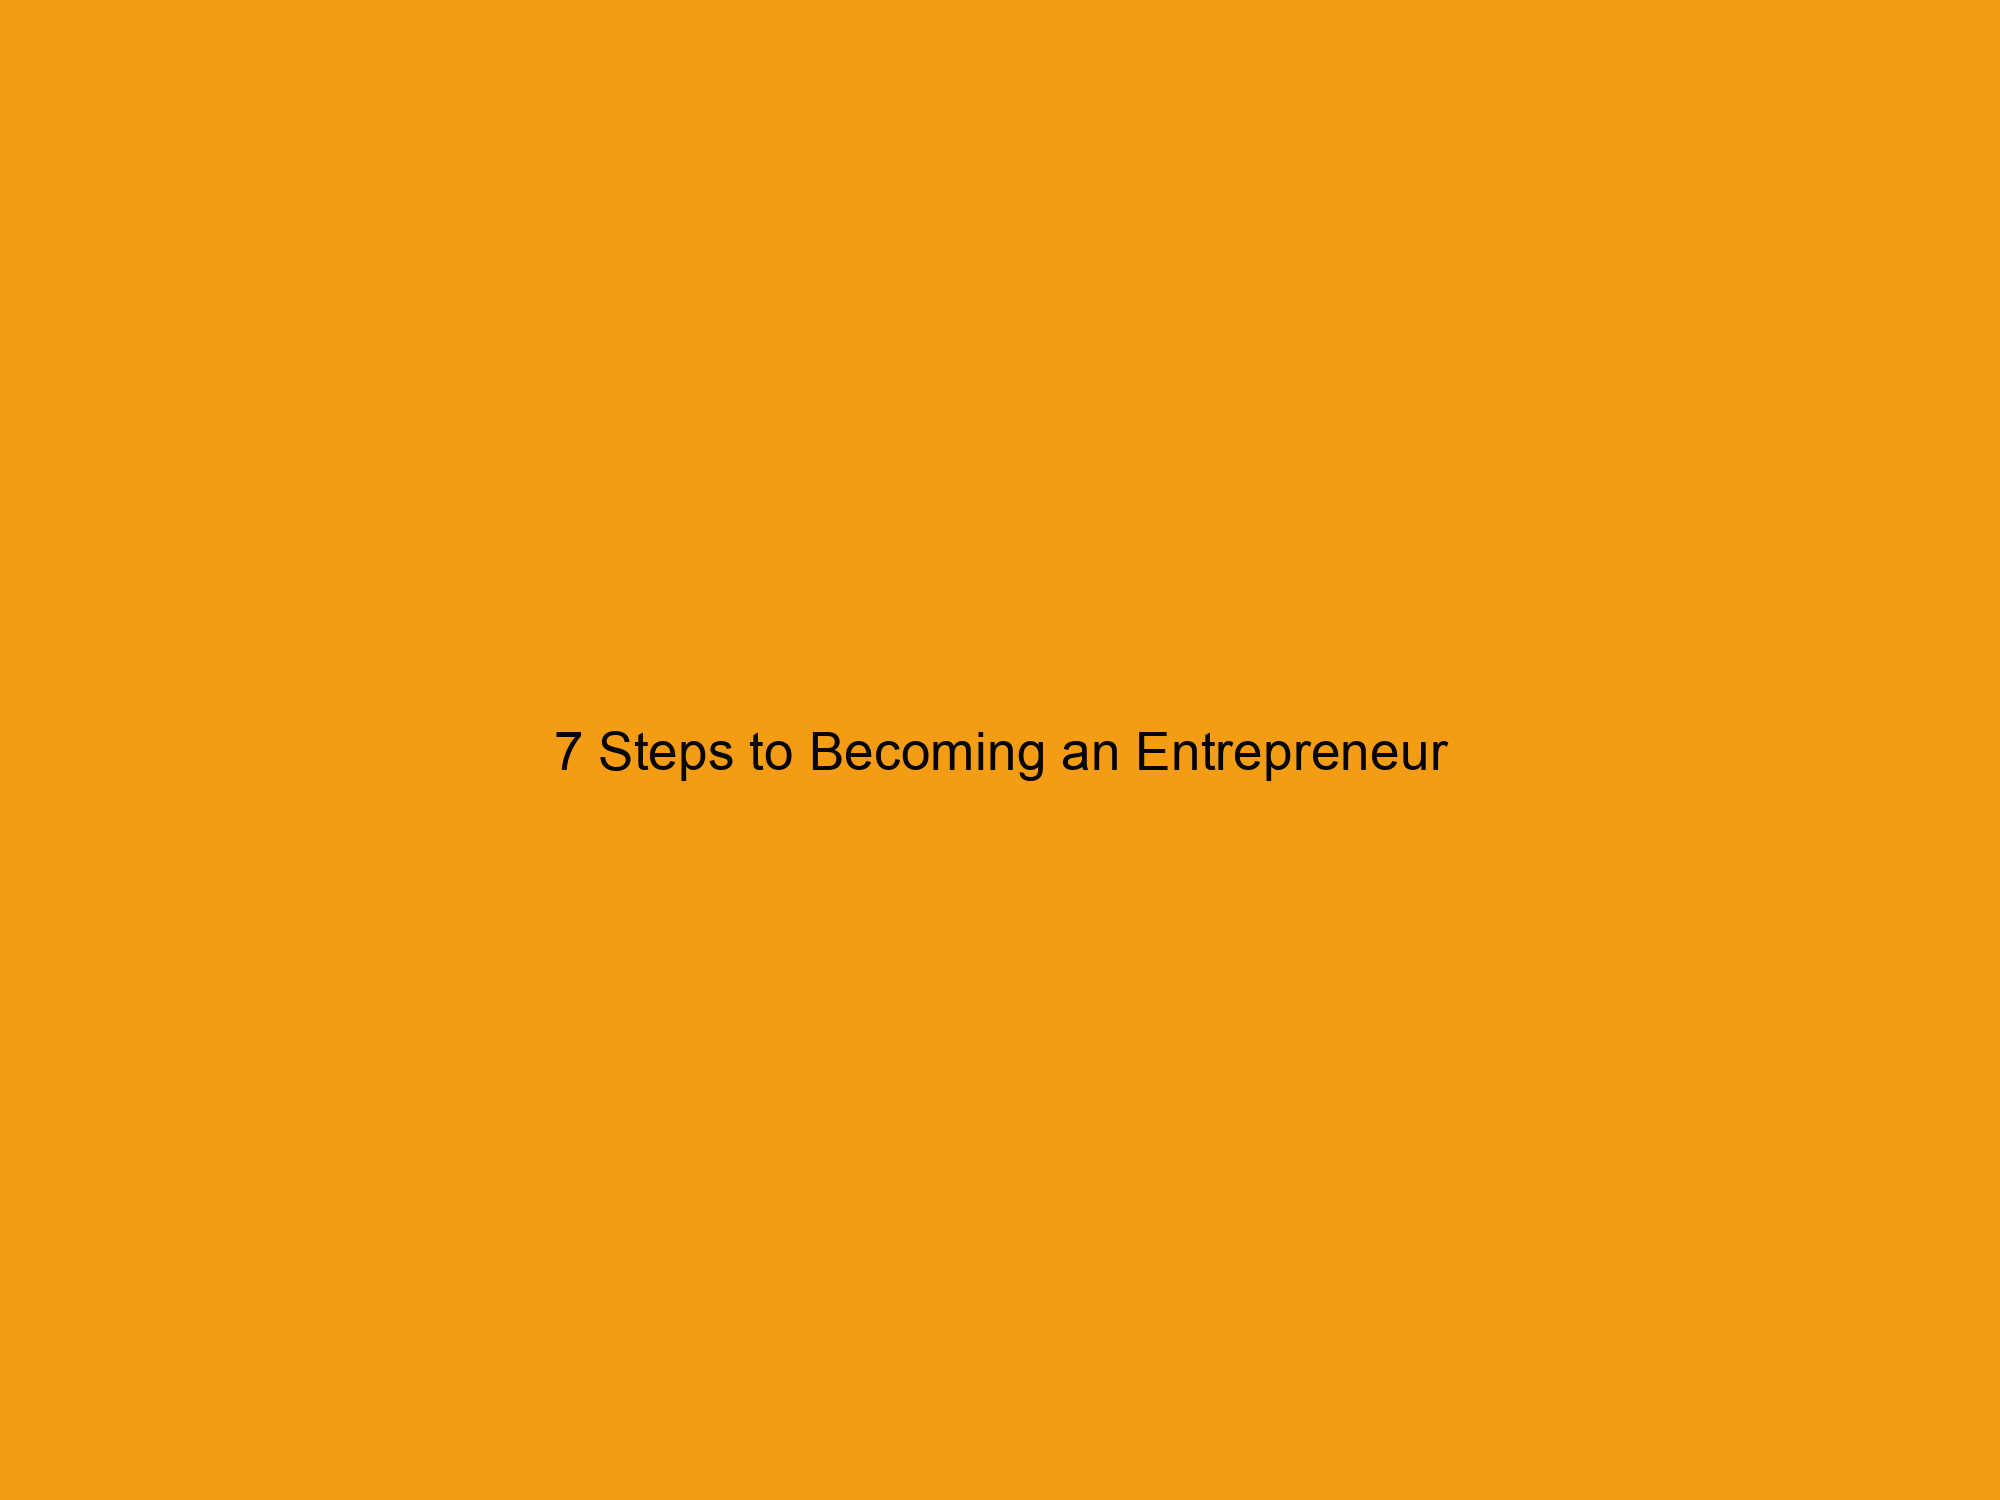 7 Steps to Becoming an Entrepreneur